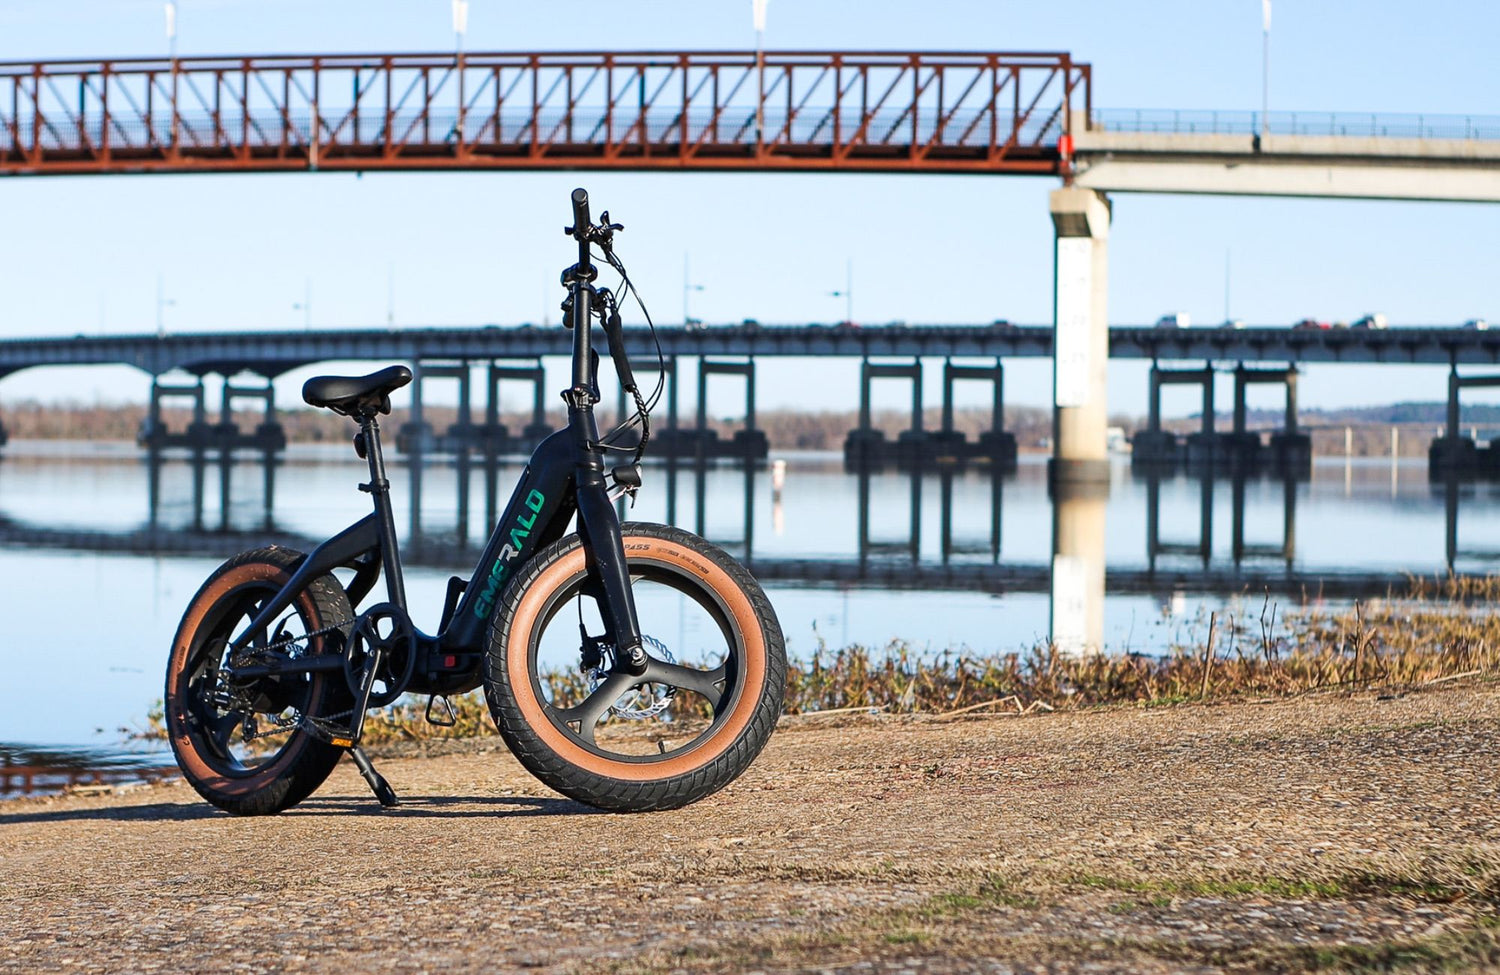 Emerald ebike parked on a riverbank with a bridge in the background